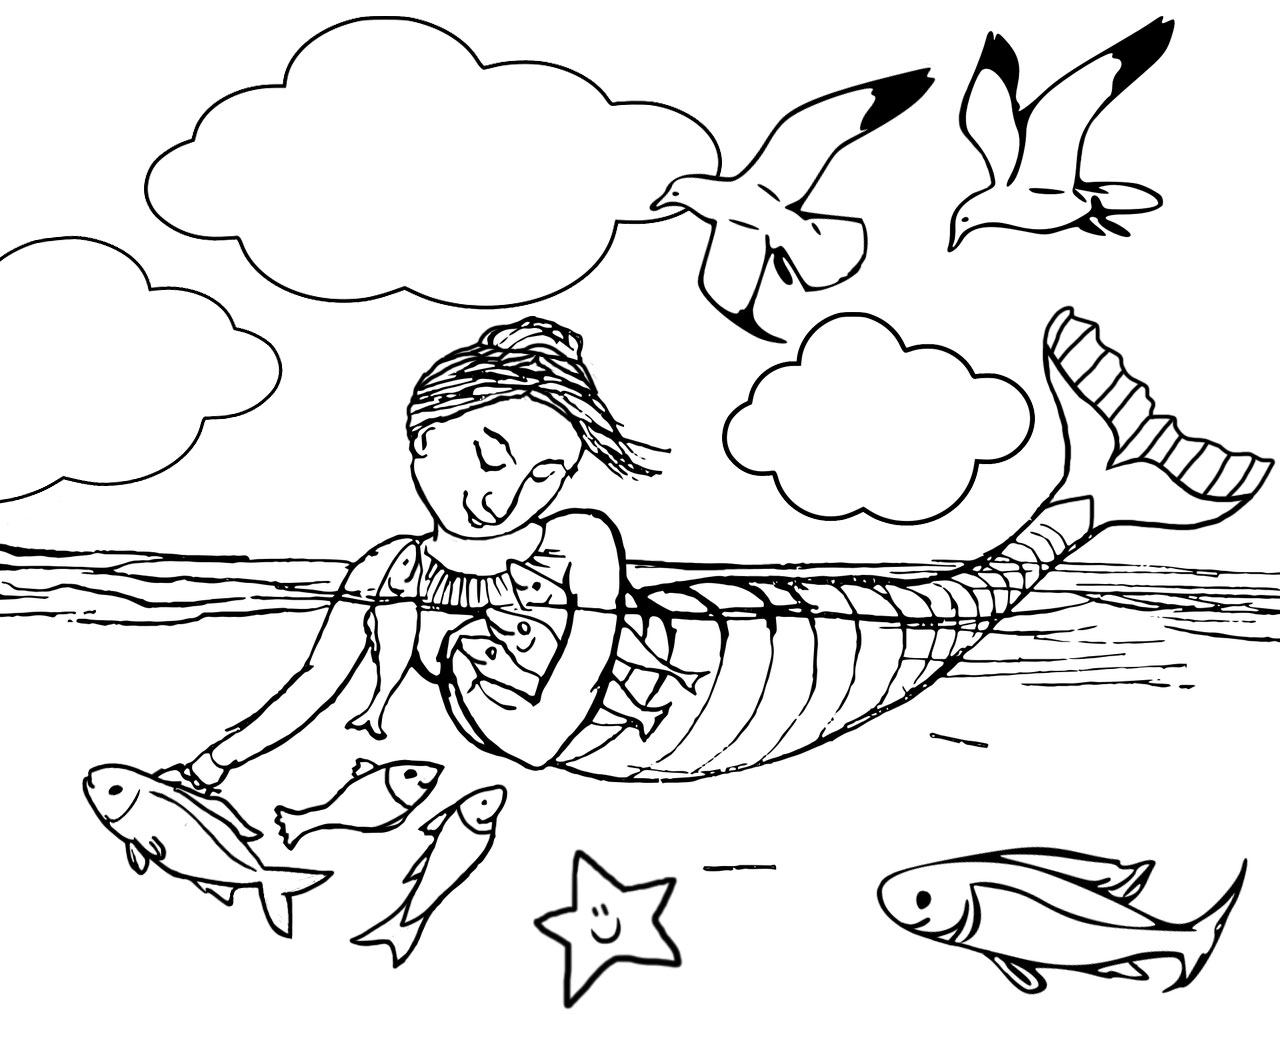 Free printable colouring page of a mermaid hugging her fish friends